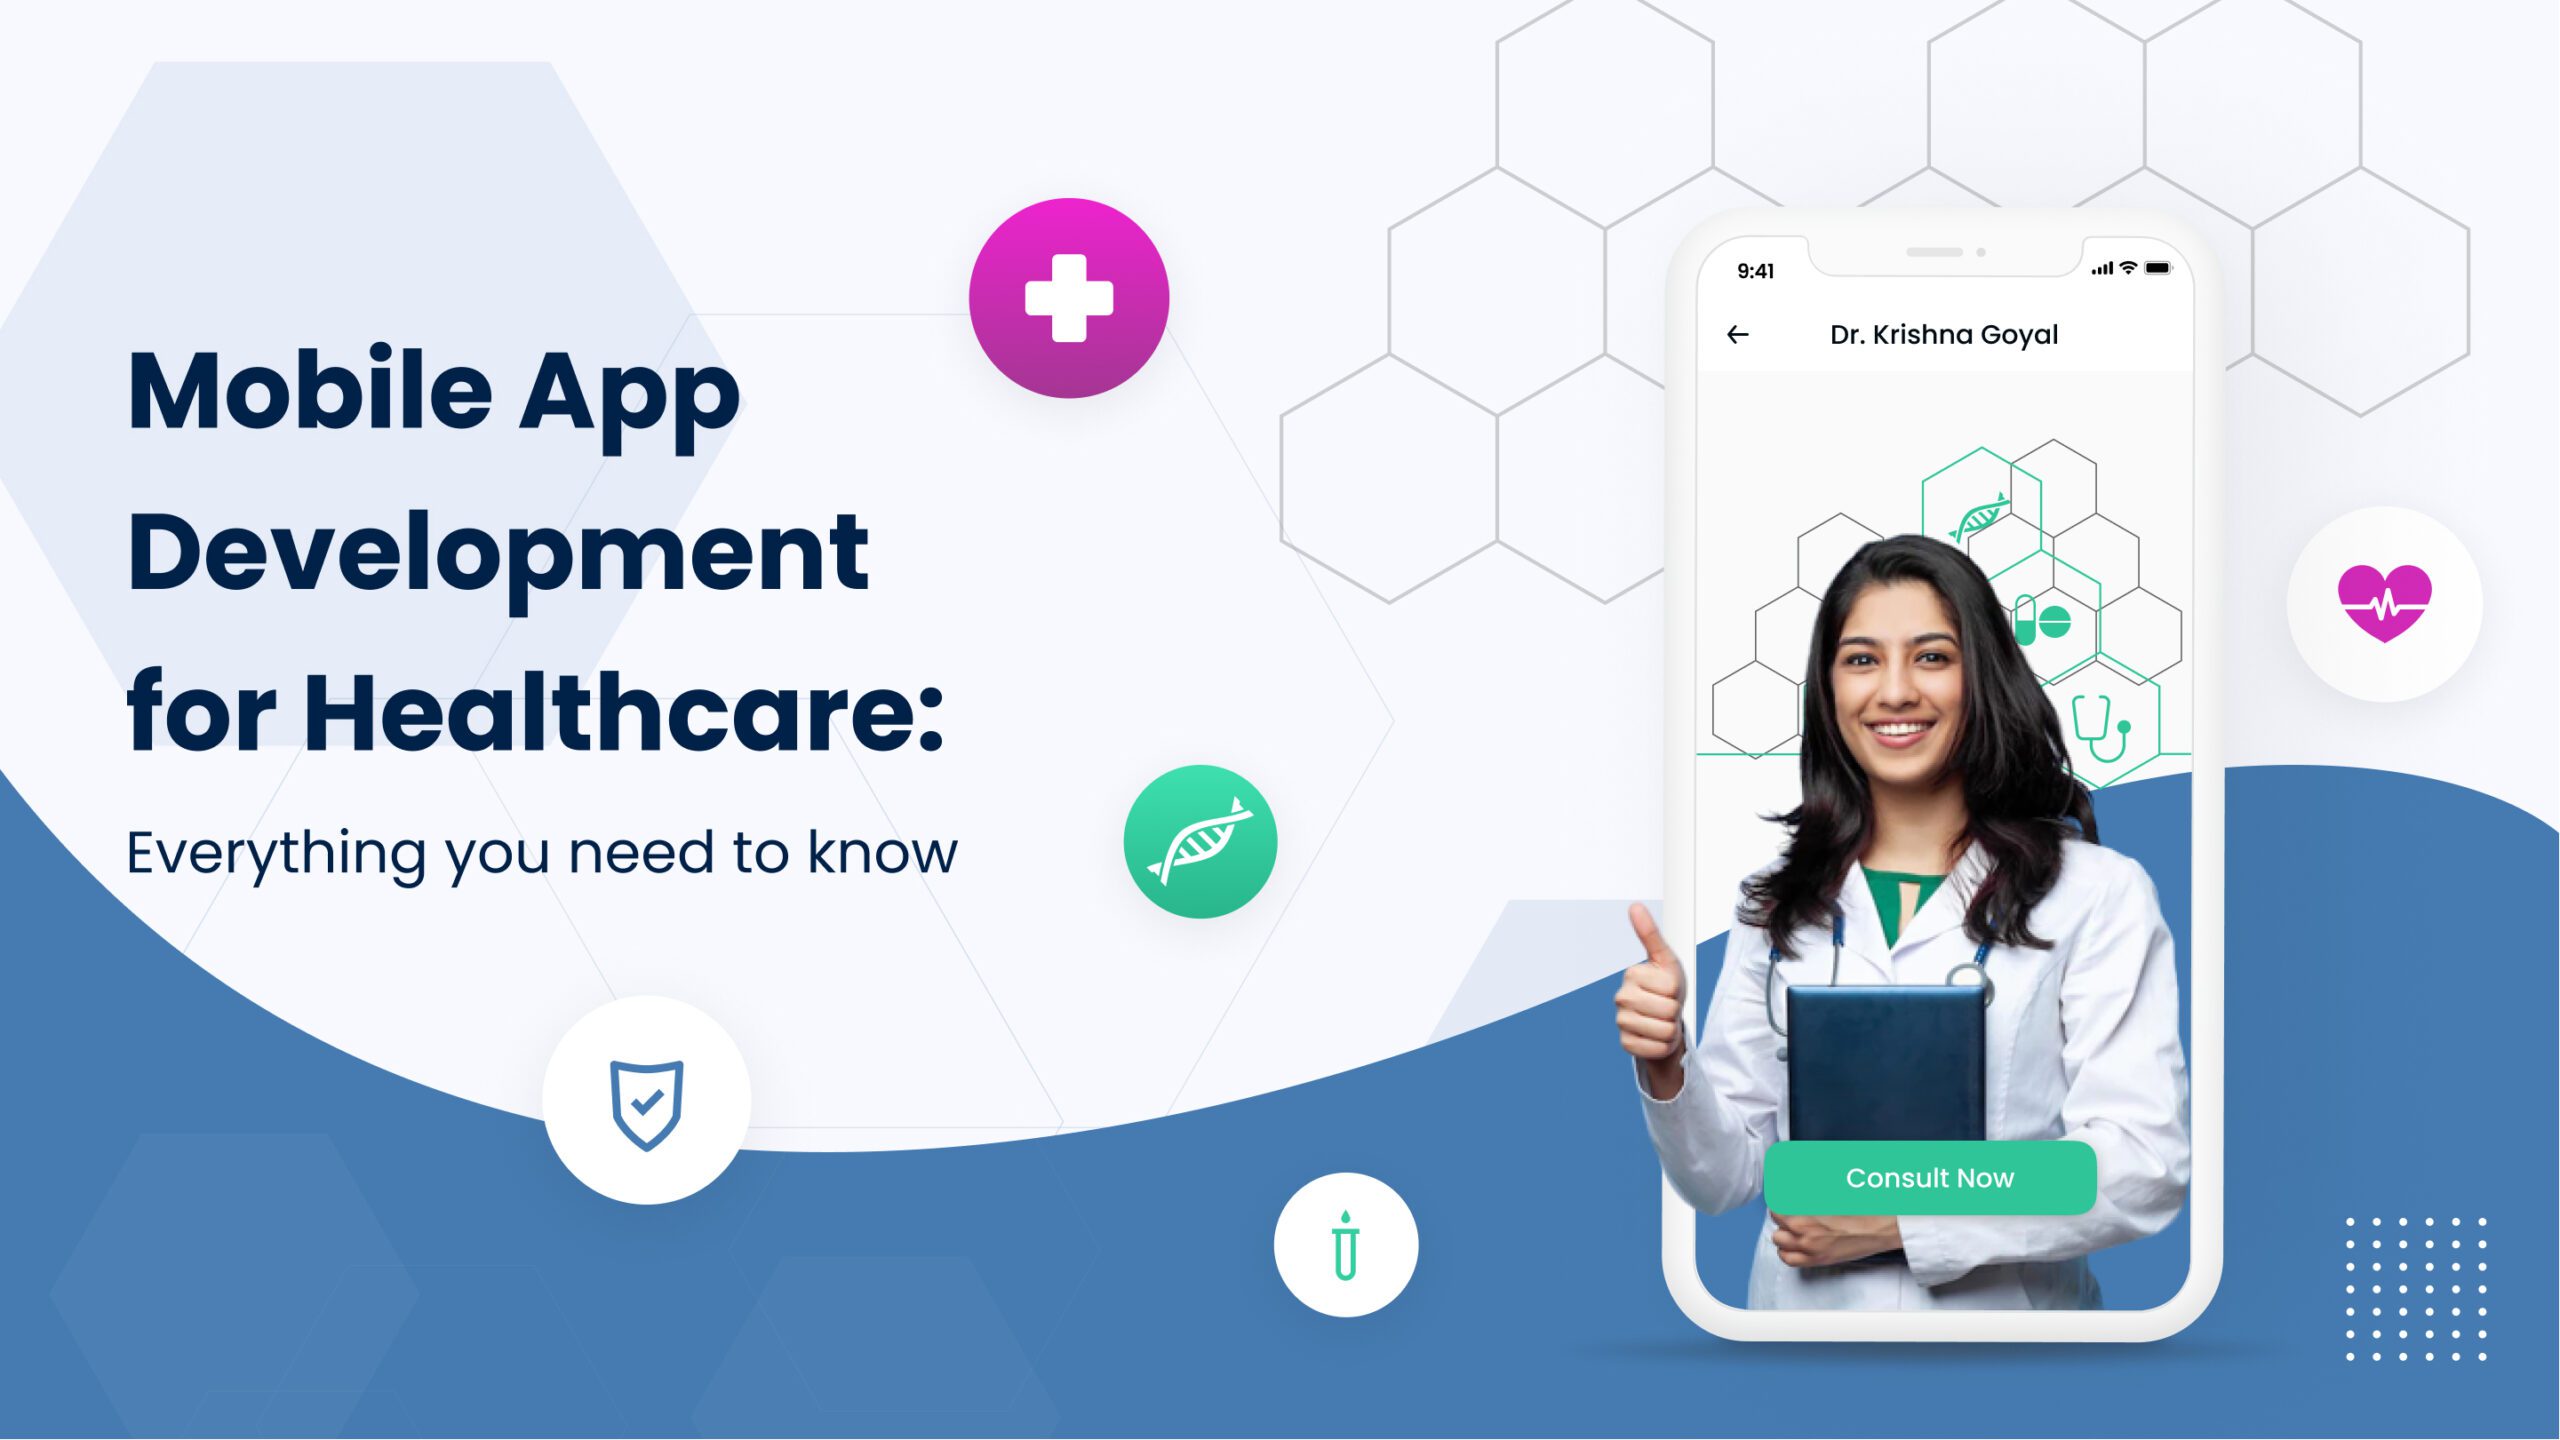 Mobile App Development for Healthcare: Everything you need to know